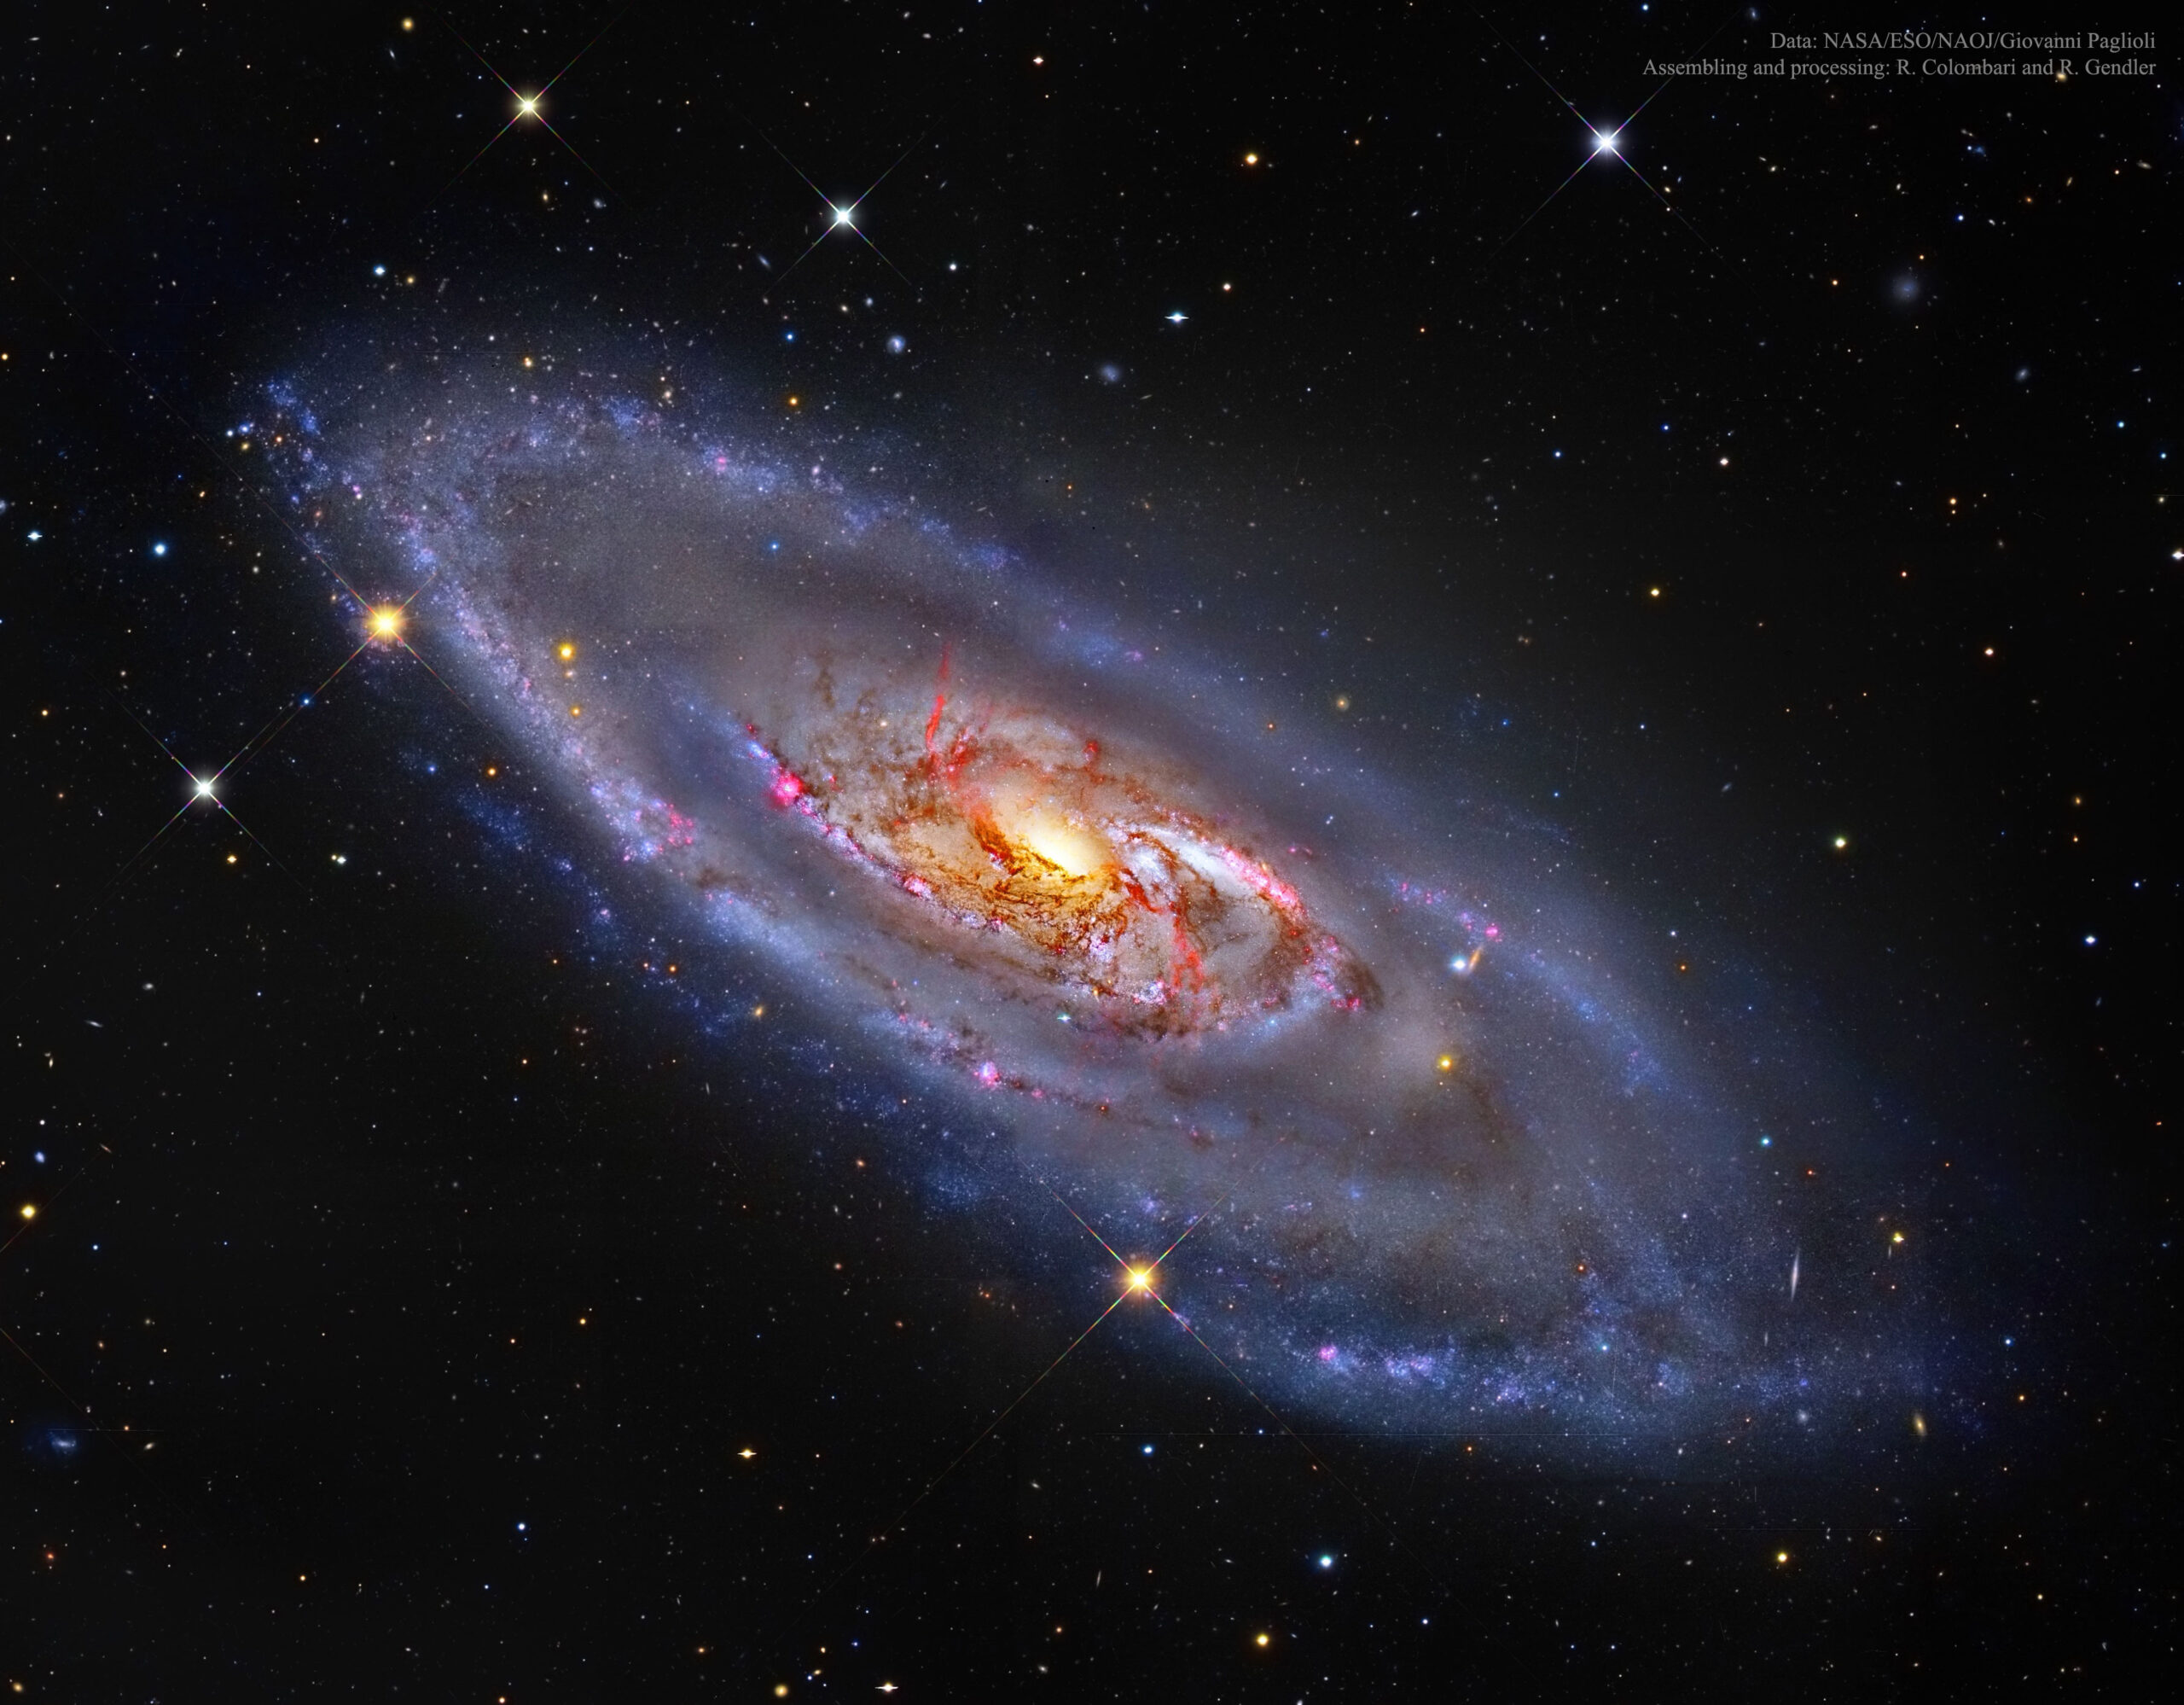 Apod: 2015 February 16 - M106: A Spiral Galaxy With A  Astronomy Picture Of The Day Pictures